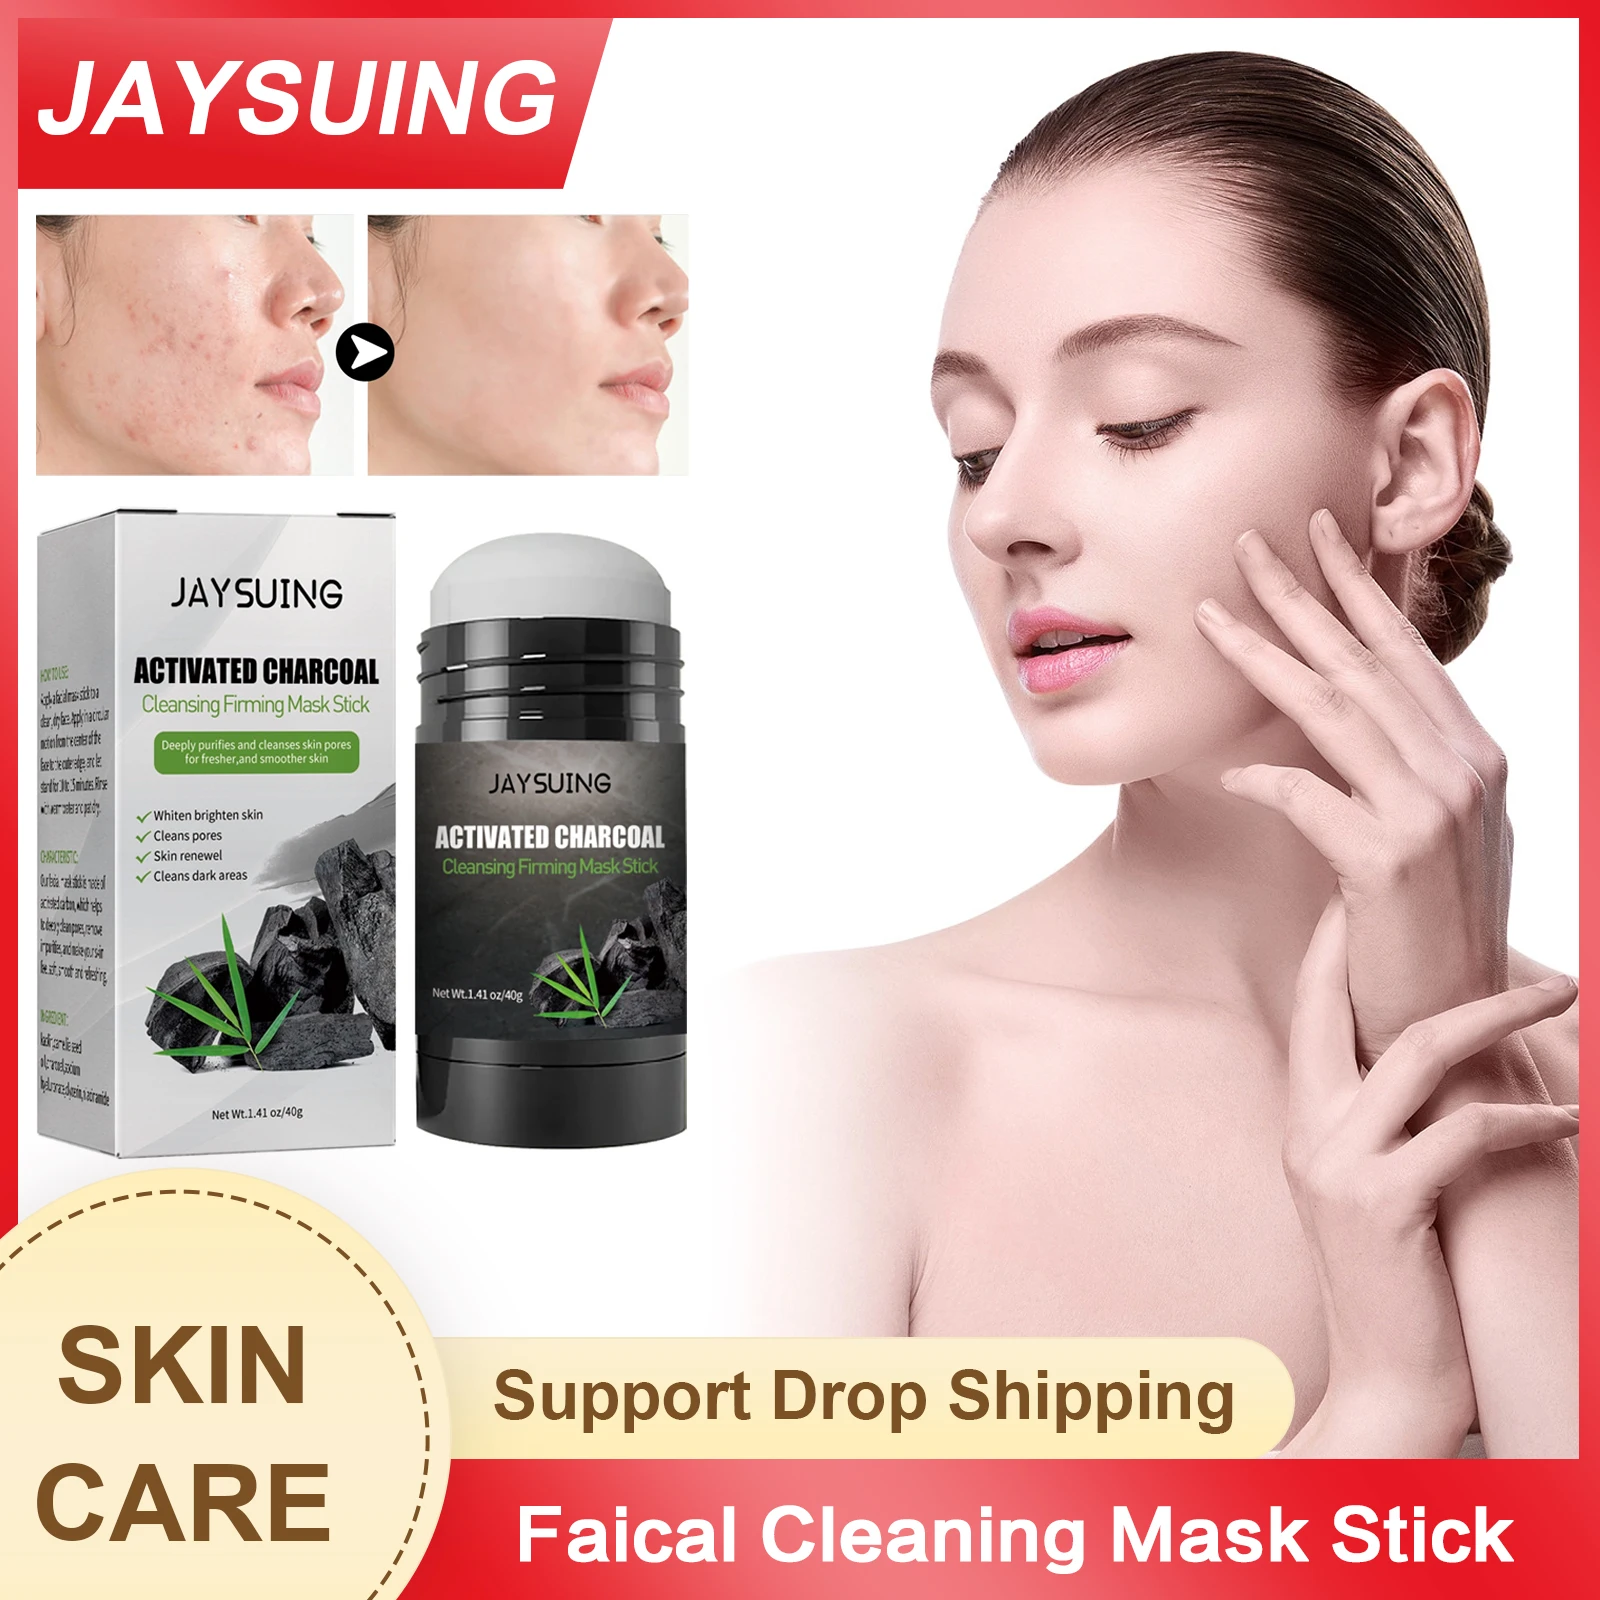 Anti Acne Mask Shrink Pores Blackheads Pimple Remover Oil Control Black Dots Spots Treatment Whitening Purifying Face Clean Mask anti acne mask shrink pores blackheads pimple remover oil control black dots spots treatment whitening purifying face clean mask